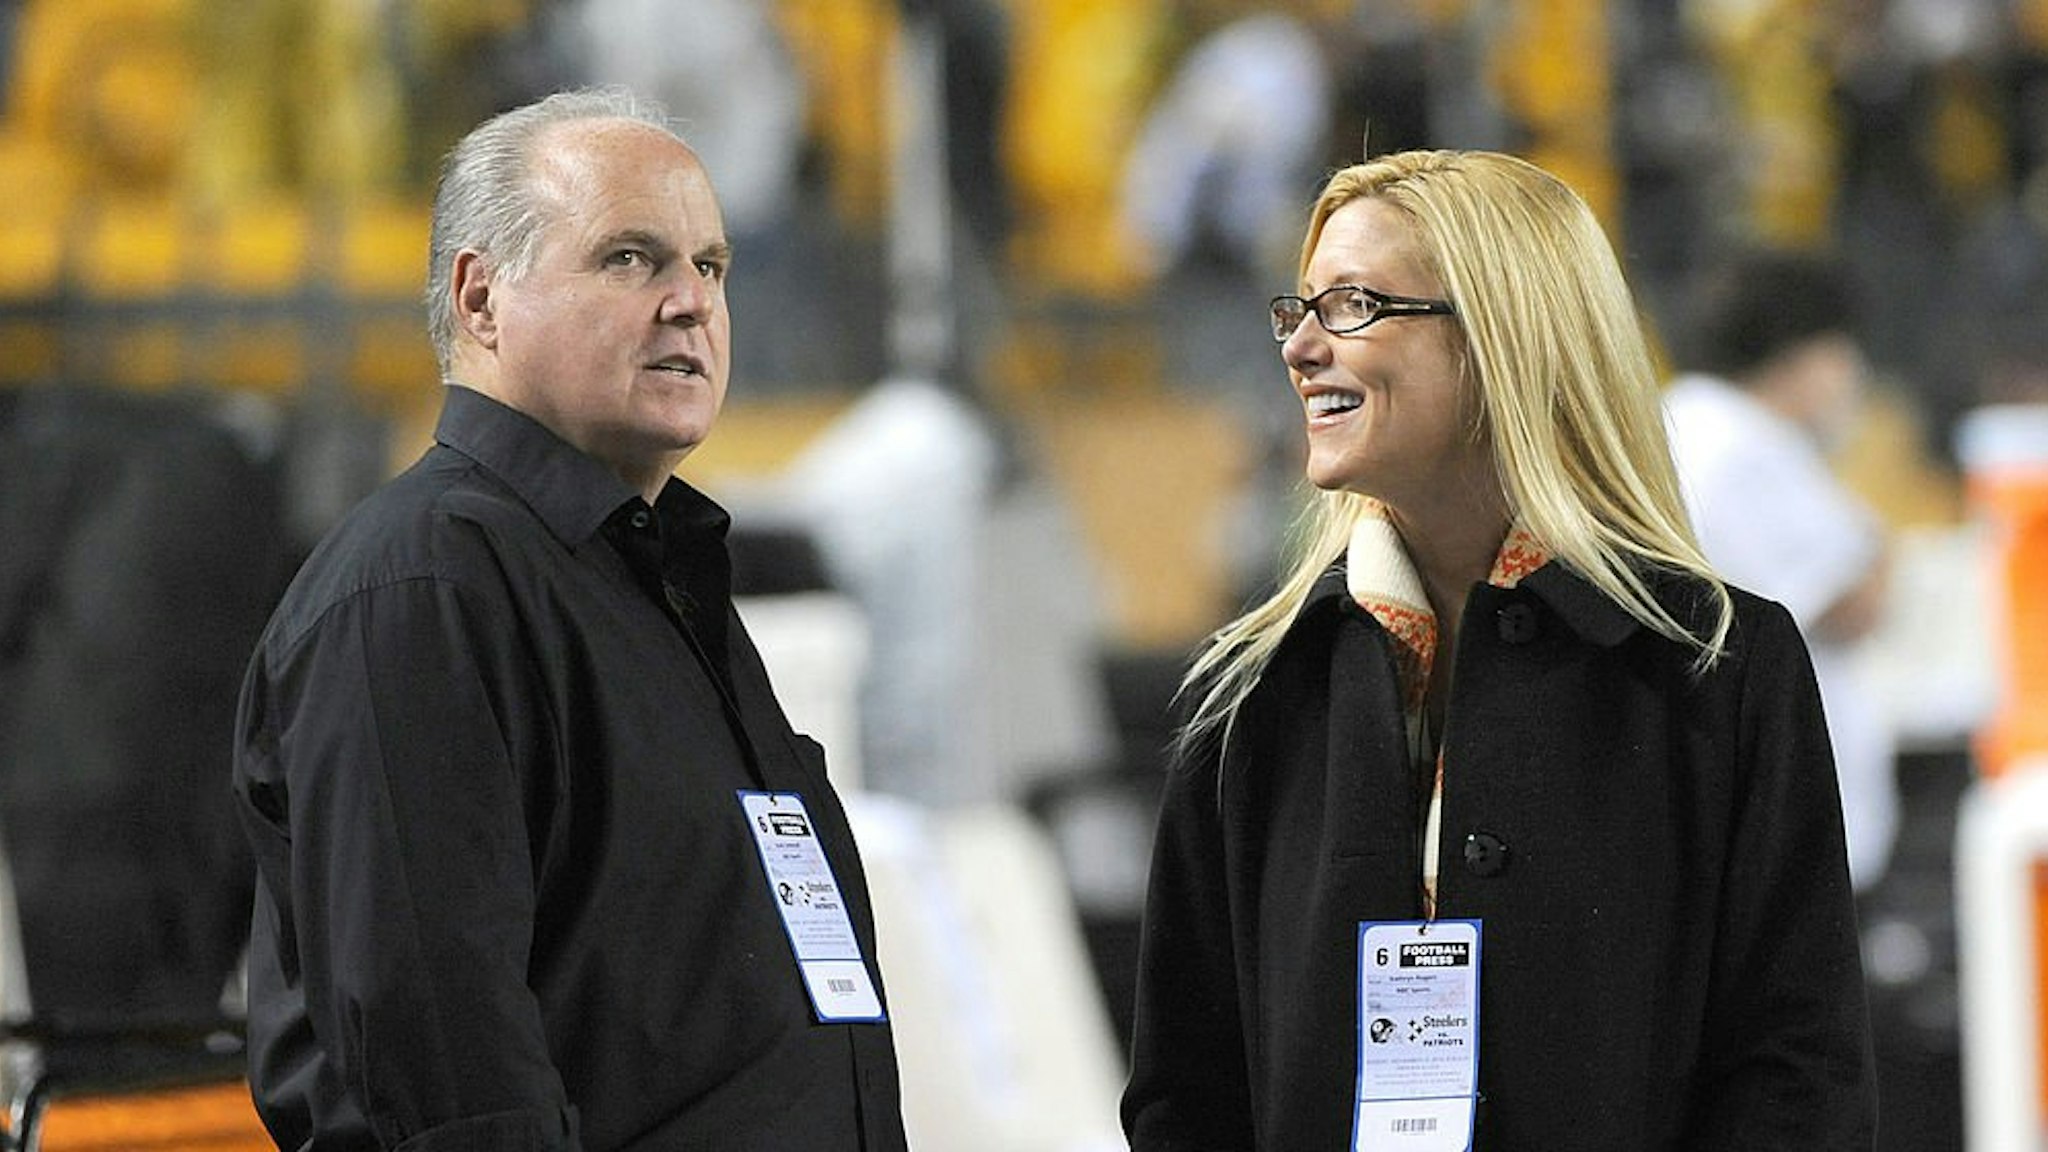 Radio talk show host and political commentator Rush Limbaugh (L) and his wife, Kathryn Rogers, look on from the sideline before a National Football League game between the New England Patriots and Pittsburgh Steelers at Heinz Field on November 14, 2010.